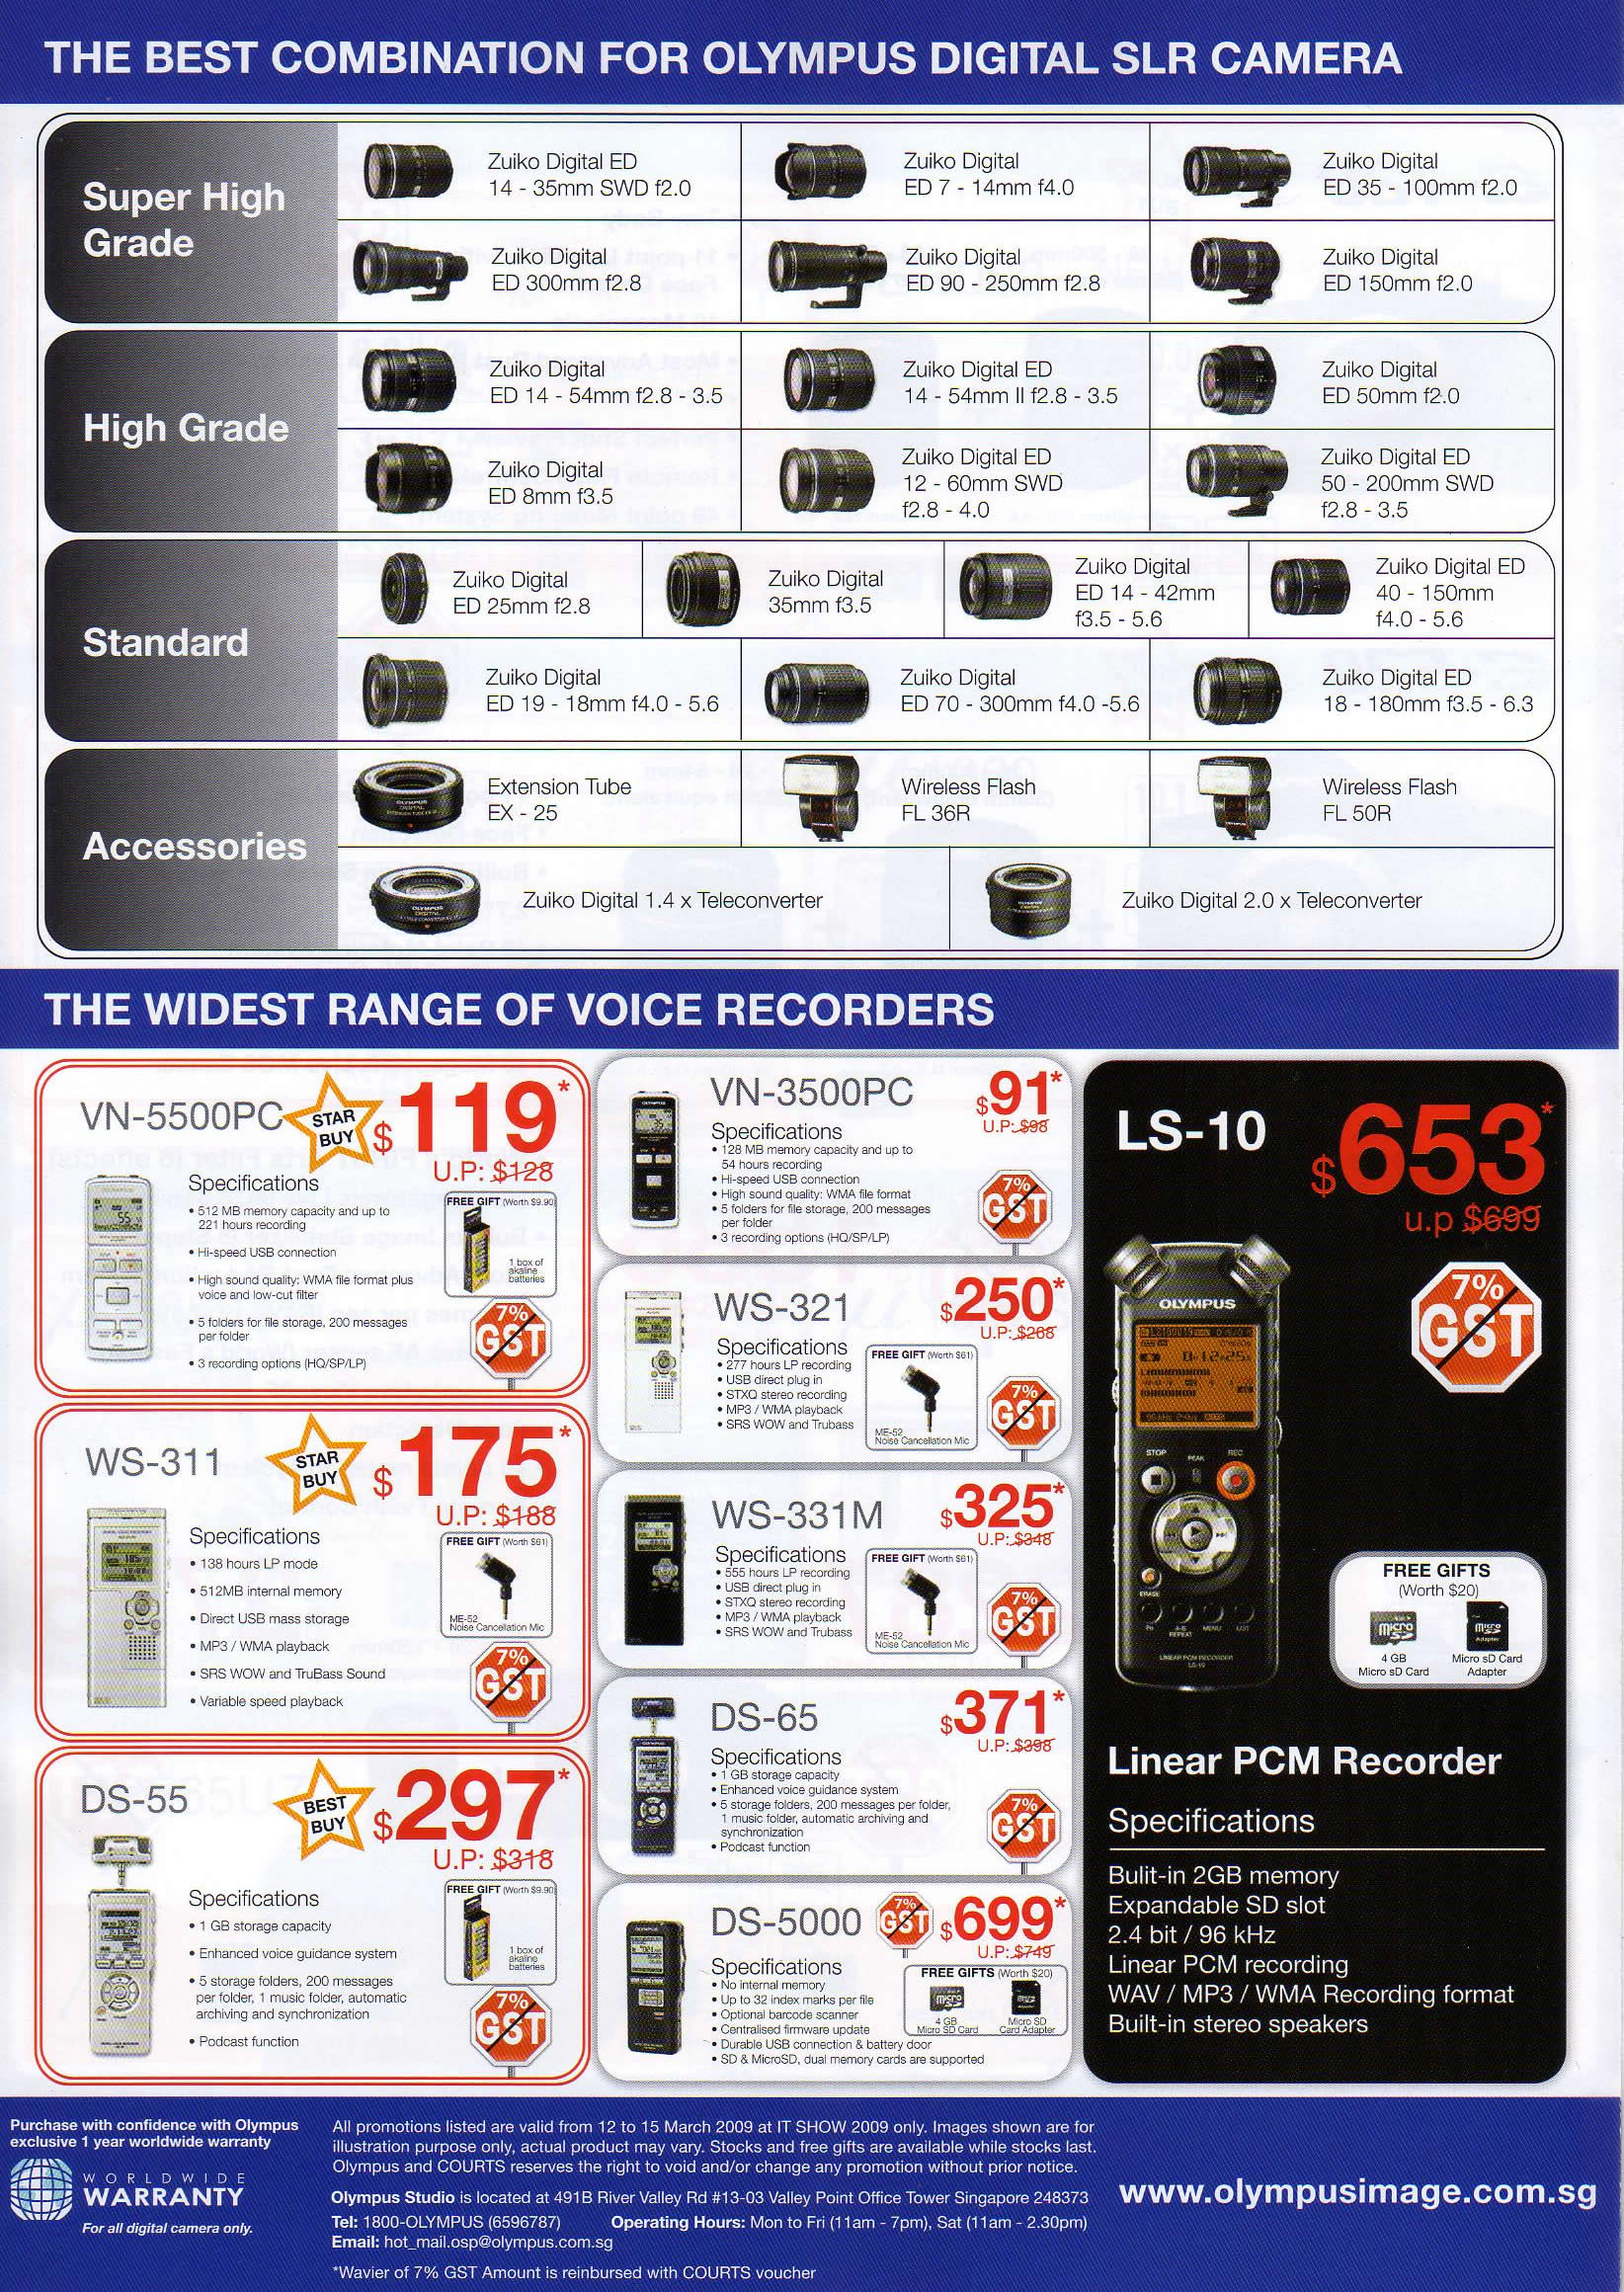 IT Show 2009 price list image brochure of Olympus Image Camera Accessories Voice Recorders (coldfreeze)